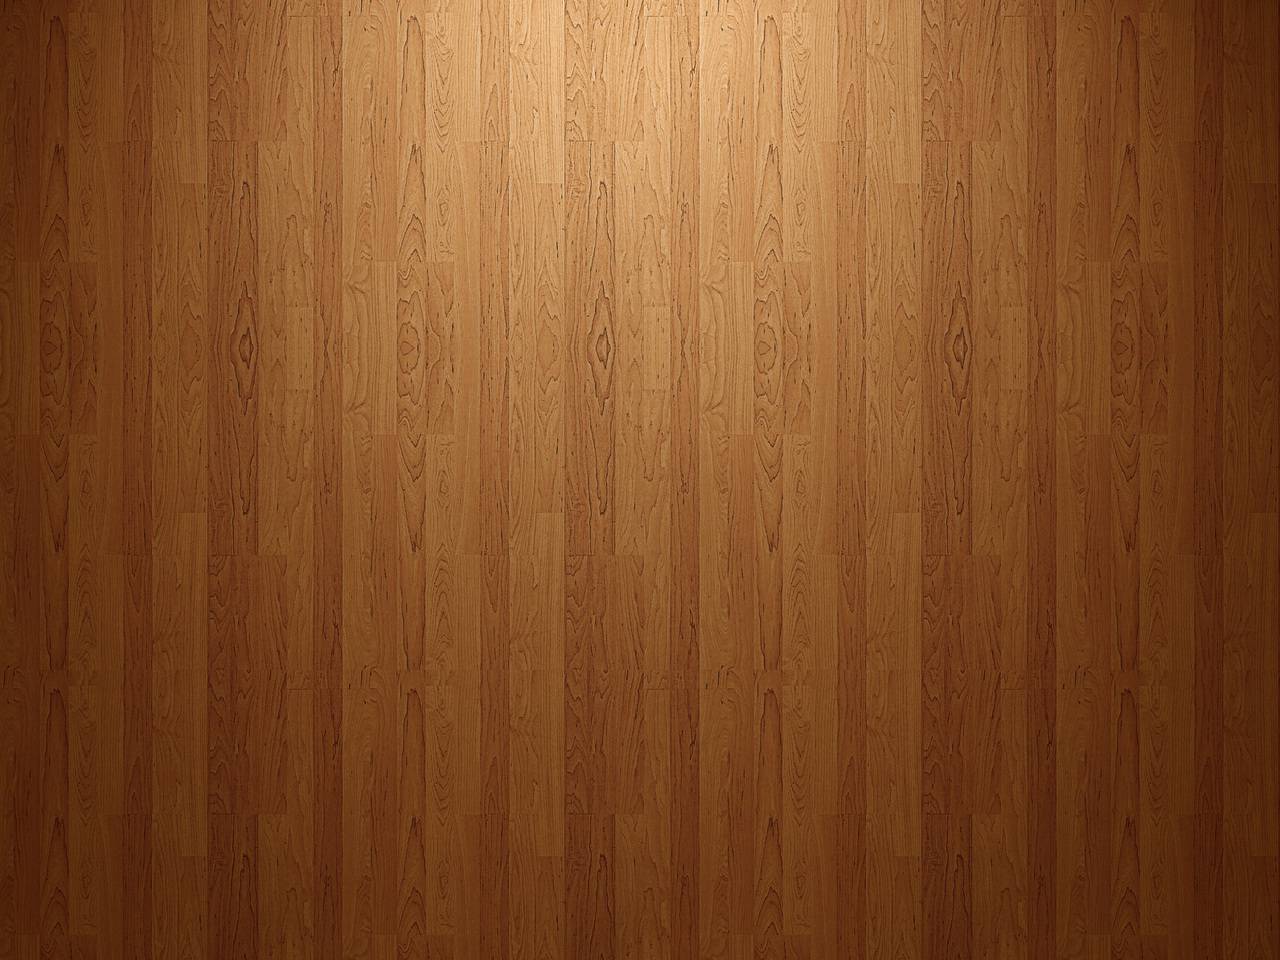 Lets have some wood paneling walls plox wallpaper -